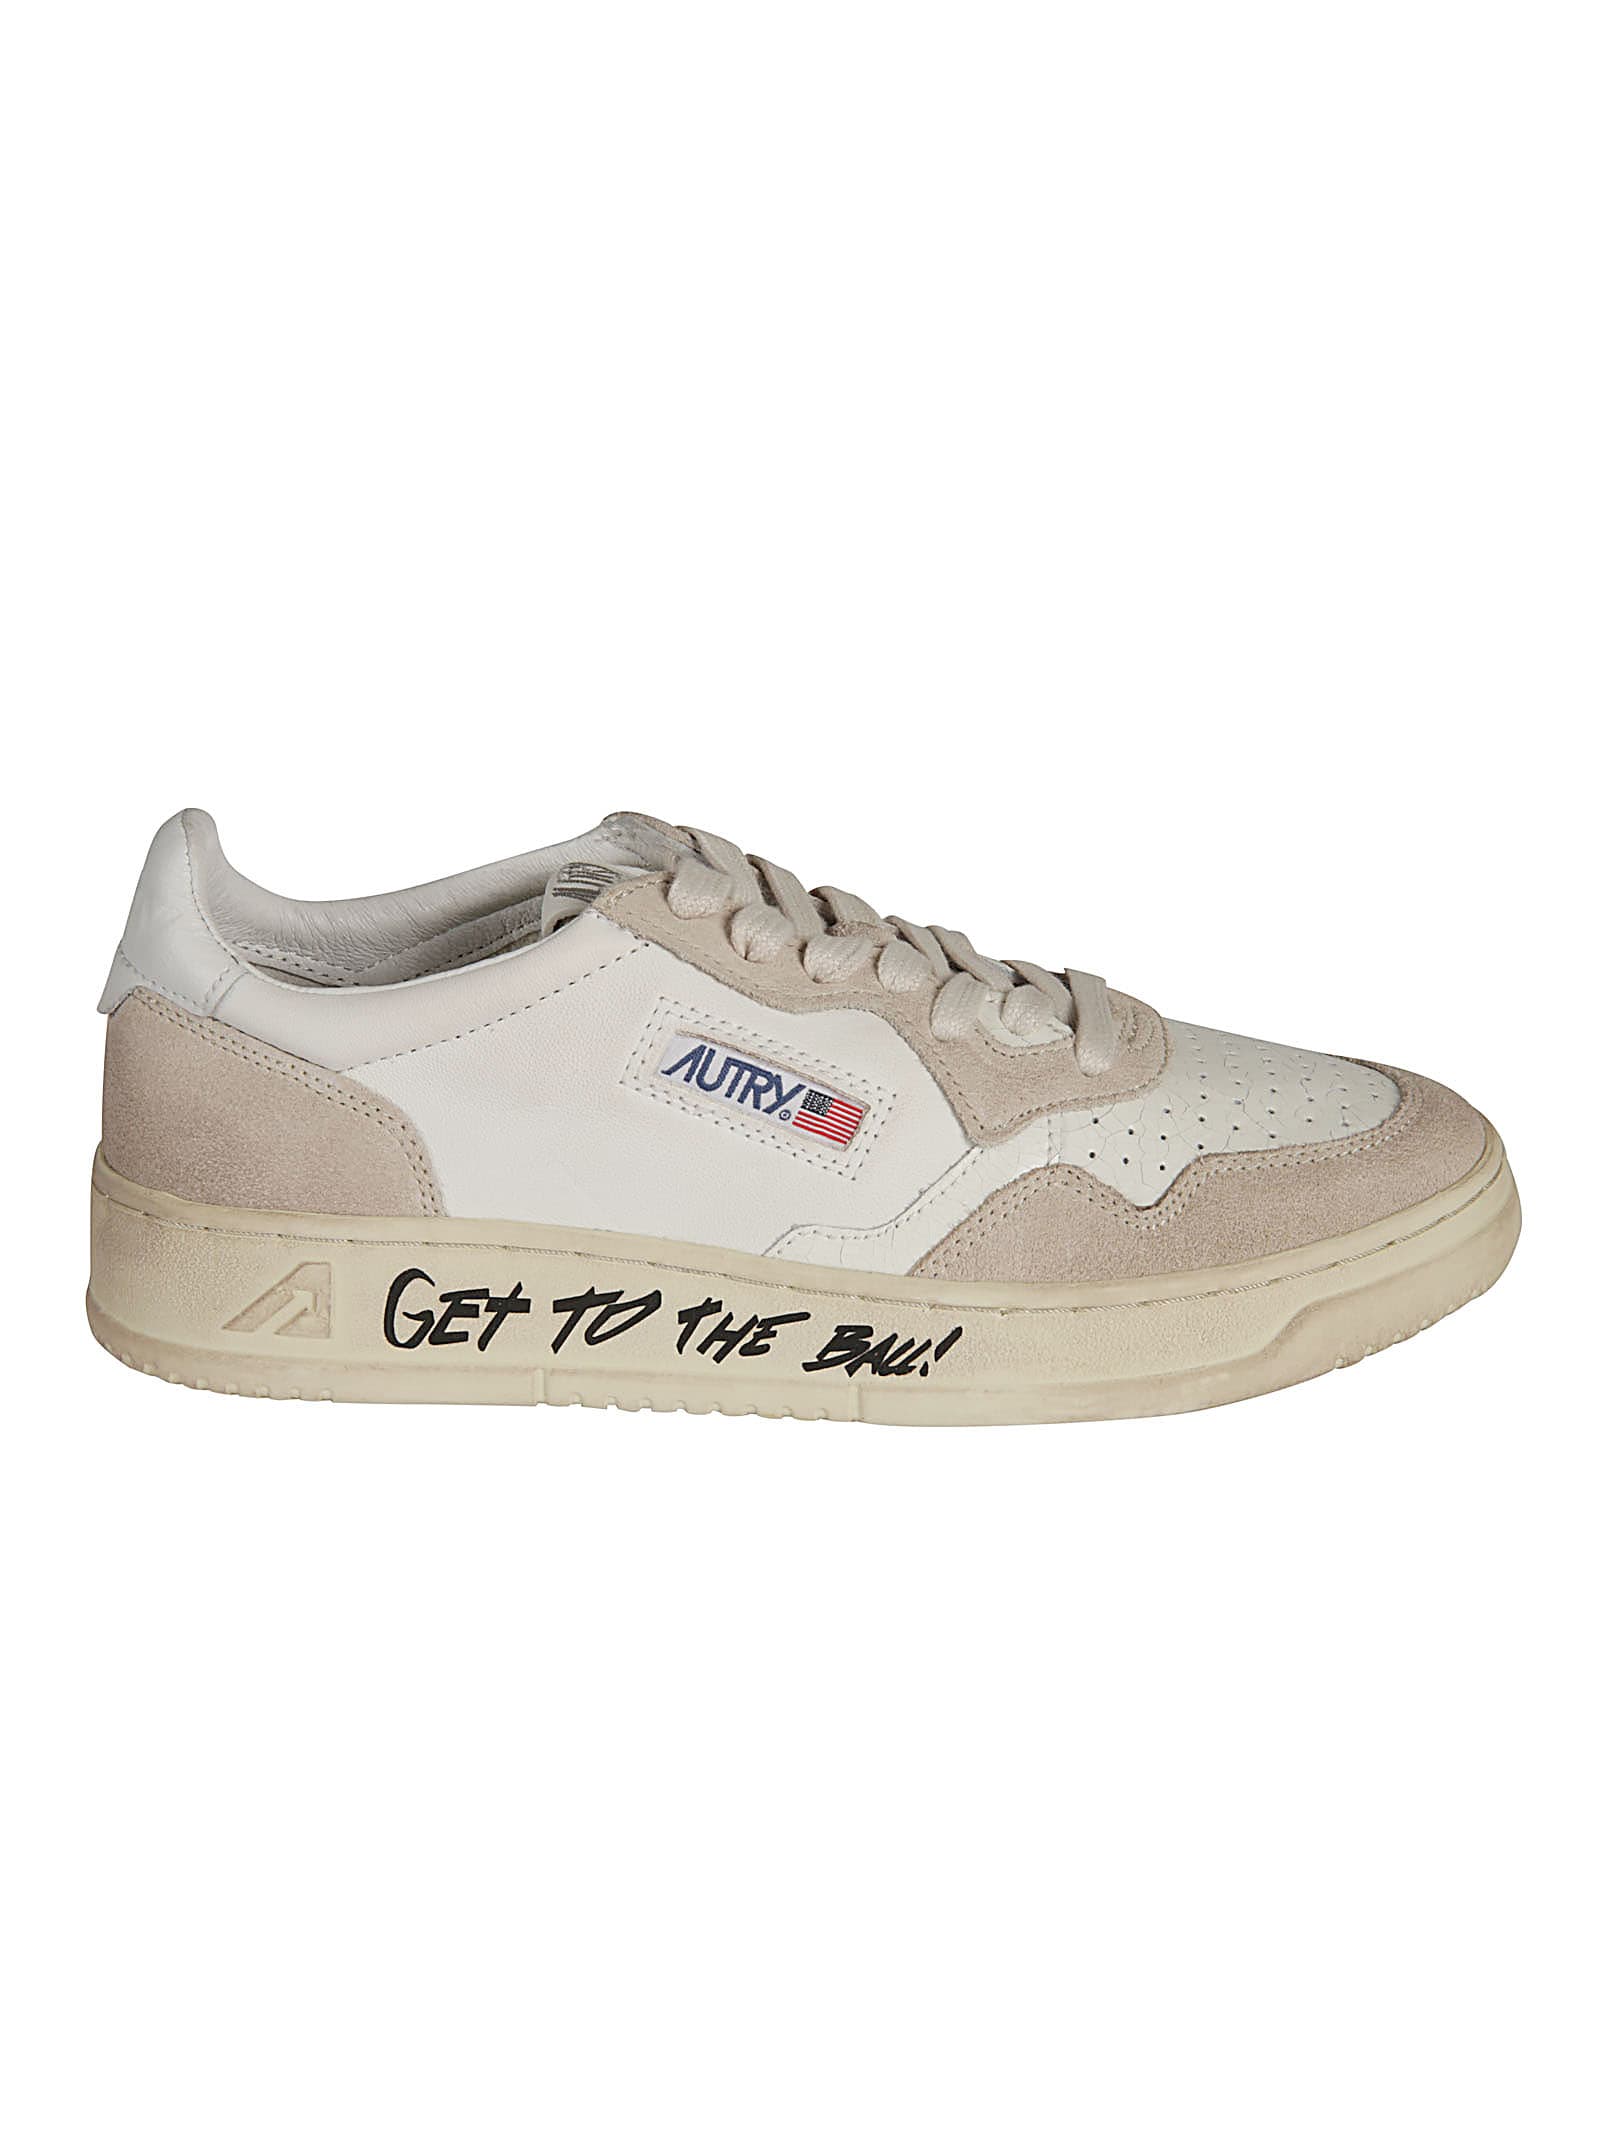 Autry Get To The Ball Written Logo Patched Sneakers